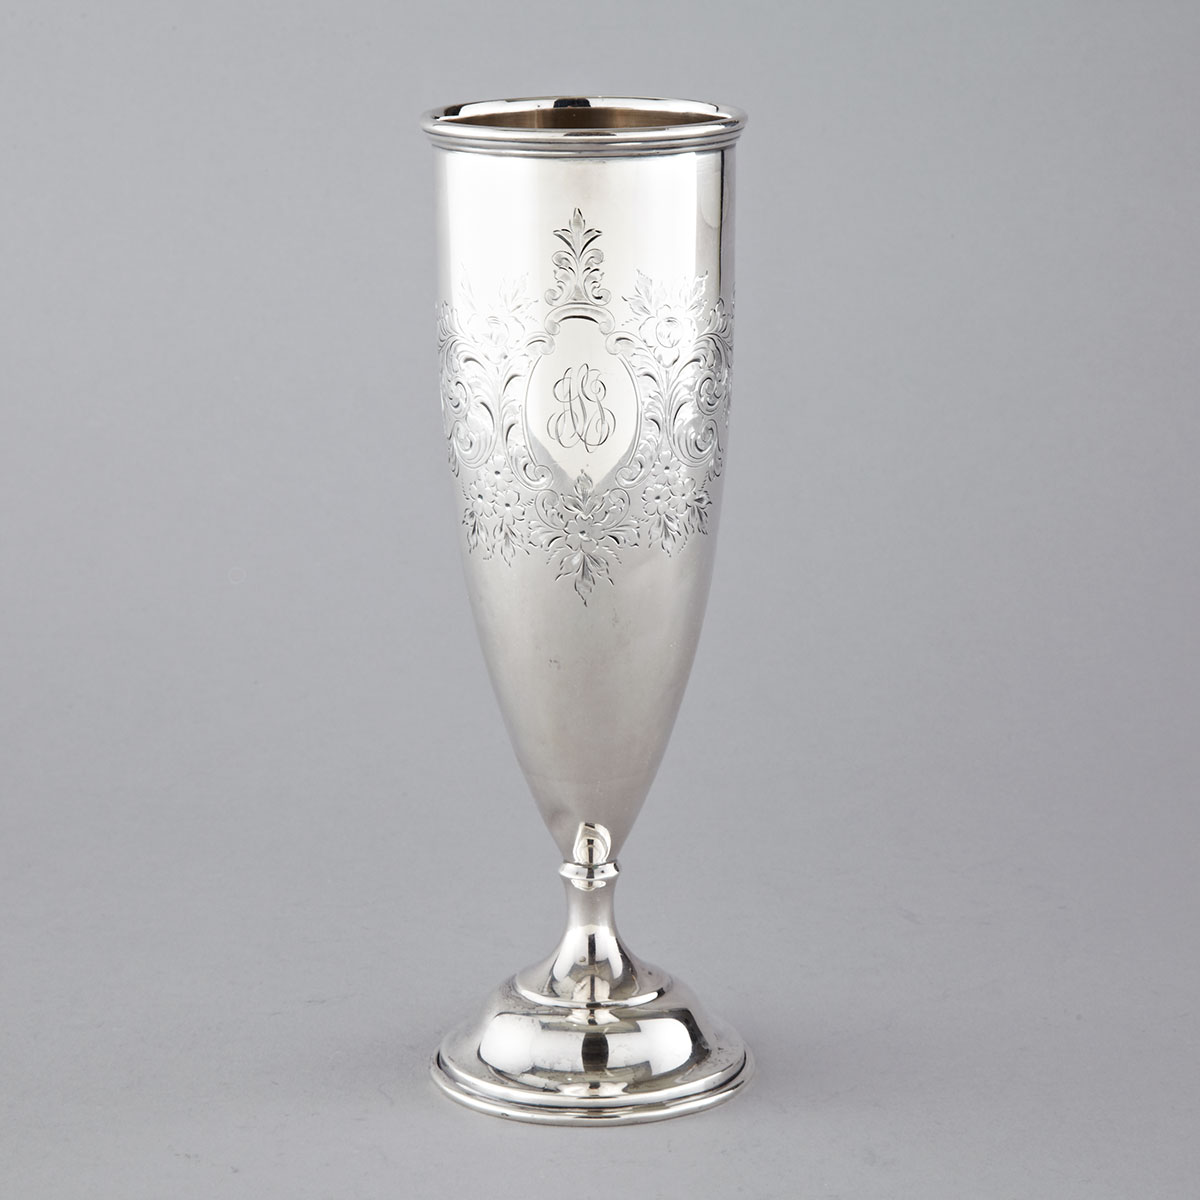 Canadian Silver Vase, Henry Birks & Sons, Montreal, Que., c.1904-24